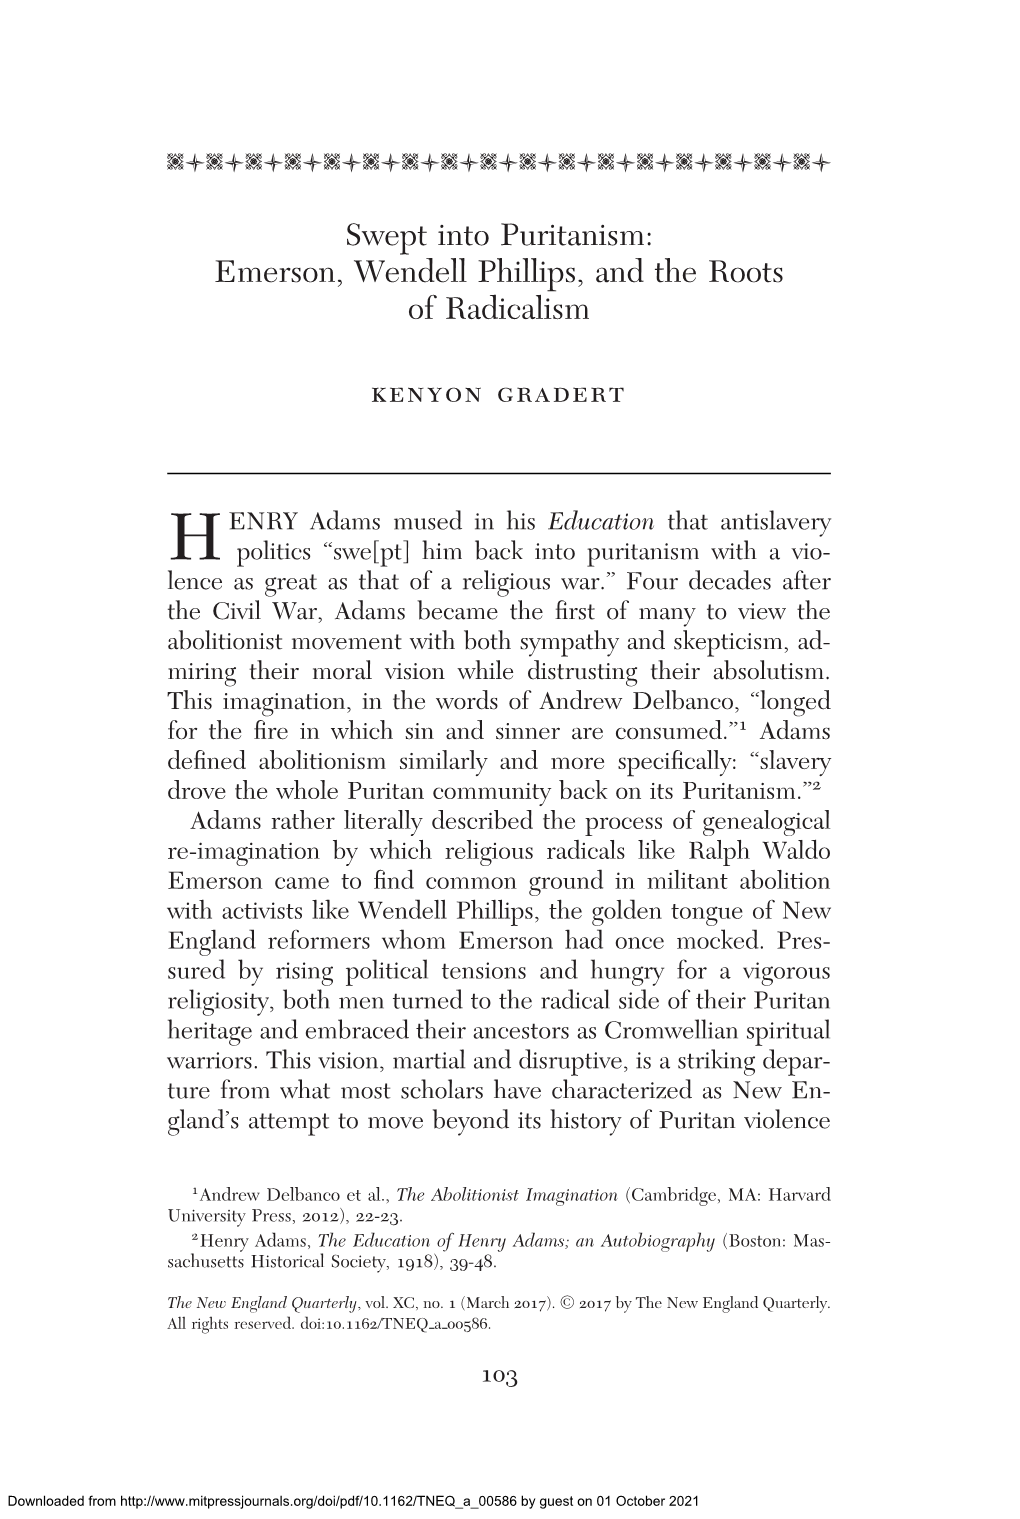 Swept Into Puritanism: Emerson, Wendell Phillips, and the Roots of Radicalism